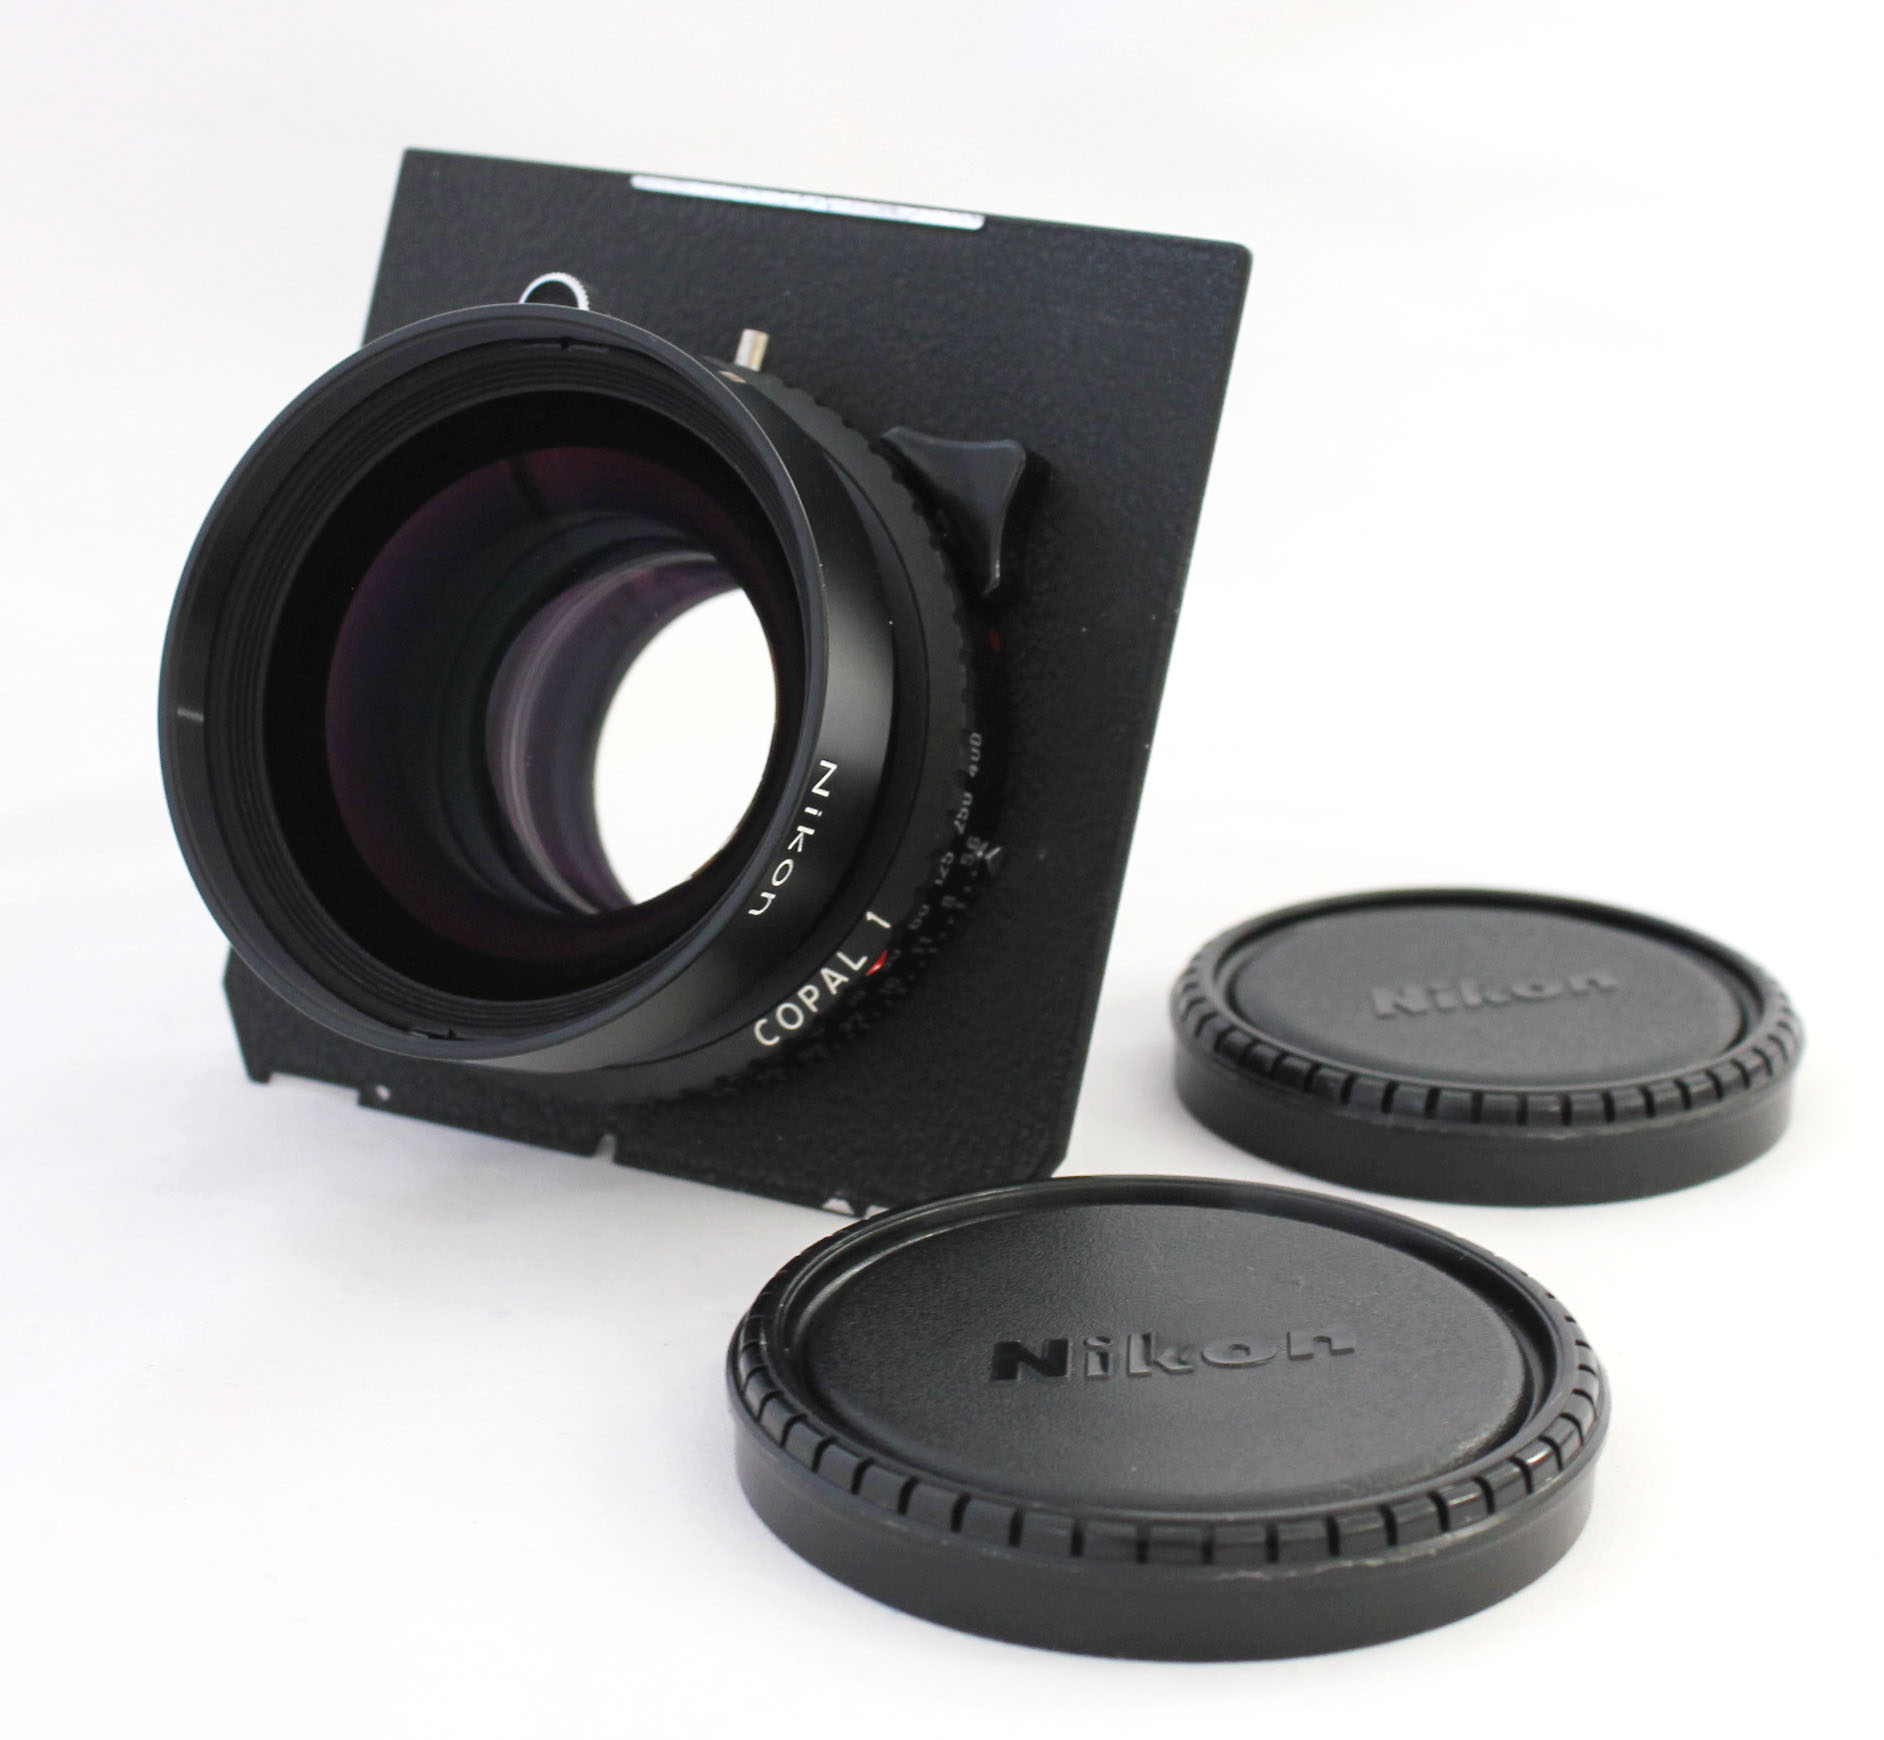 Japan Used Camera Shop | [Near Mint] Nikon Nikkor W 210mm F/5.6 4x5 Large Format Lens with Copal 1 Shutter from Japan